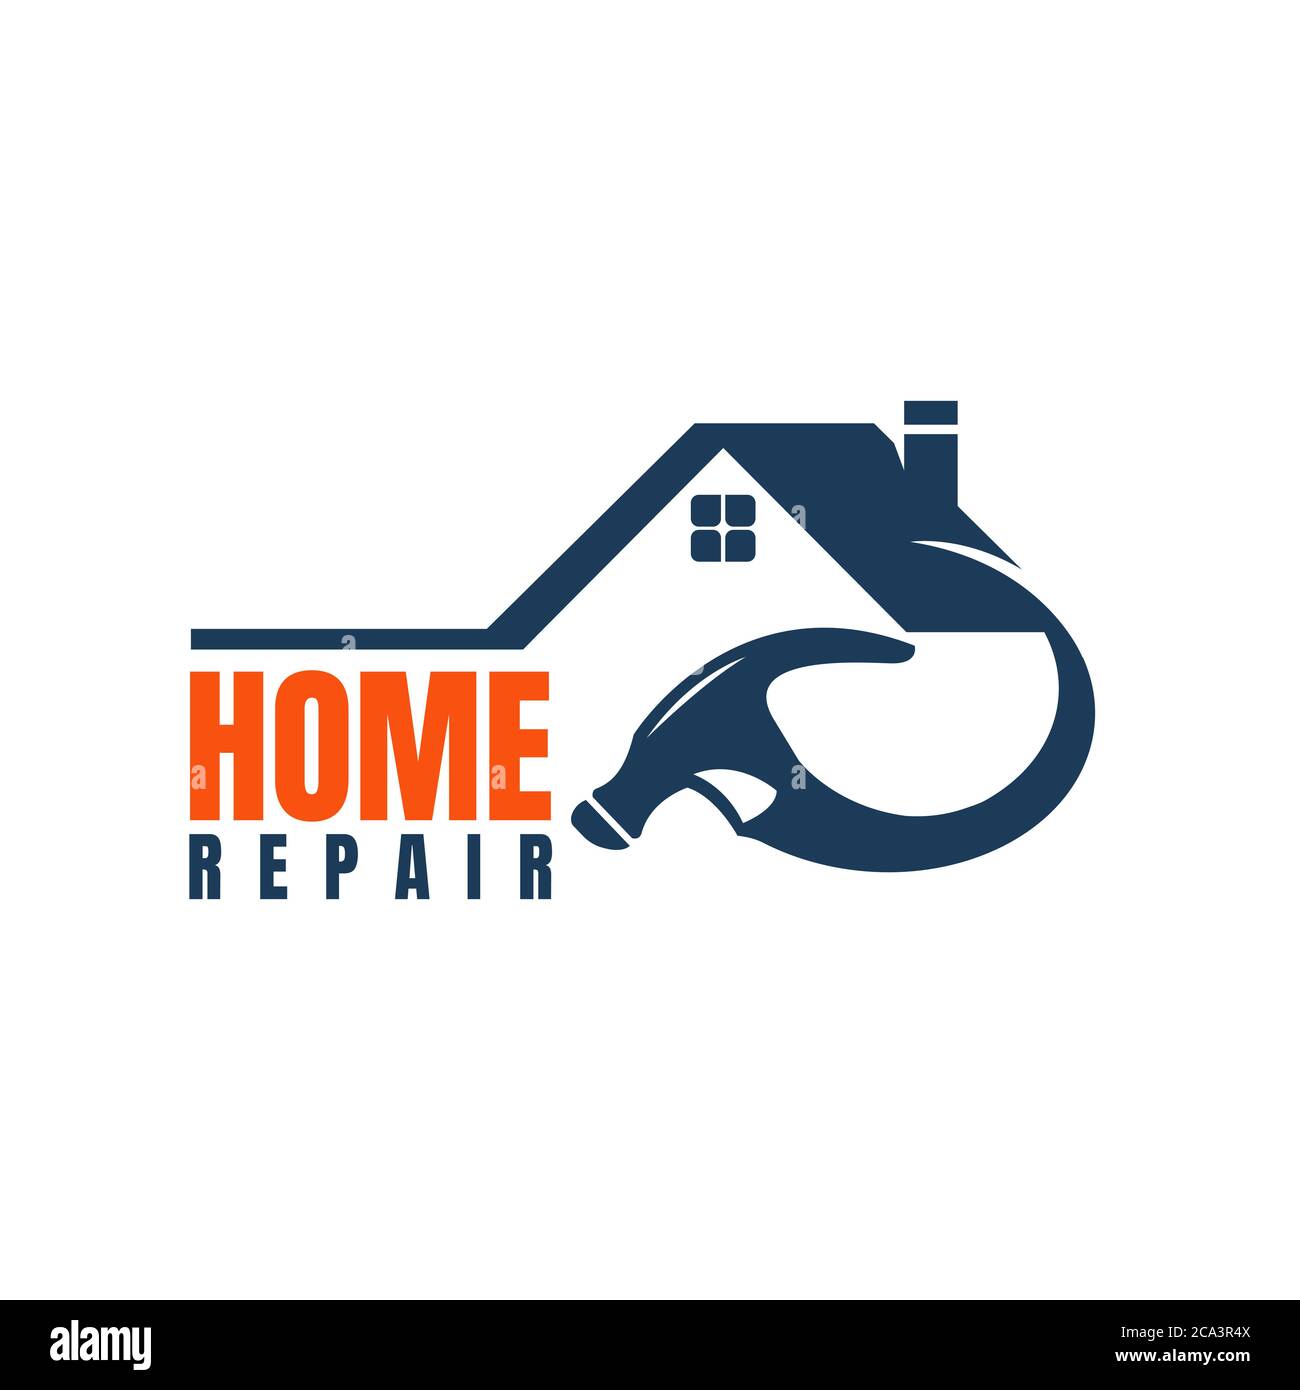 Home repair logo. House, Real Estate, Construction, Building Logo. House Vector. Tools icon. Repairs house sign. Home improvement icon. Stock Vector